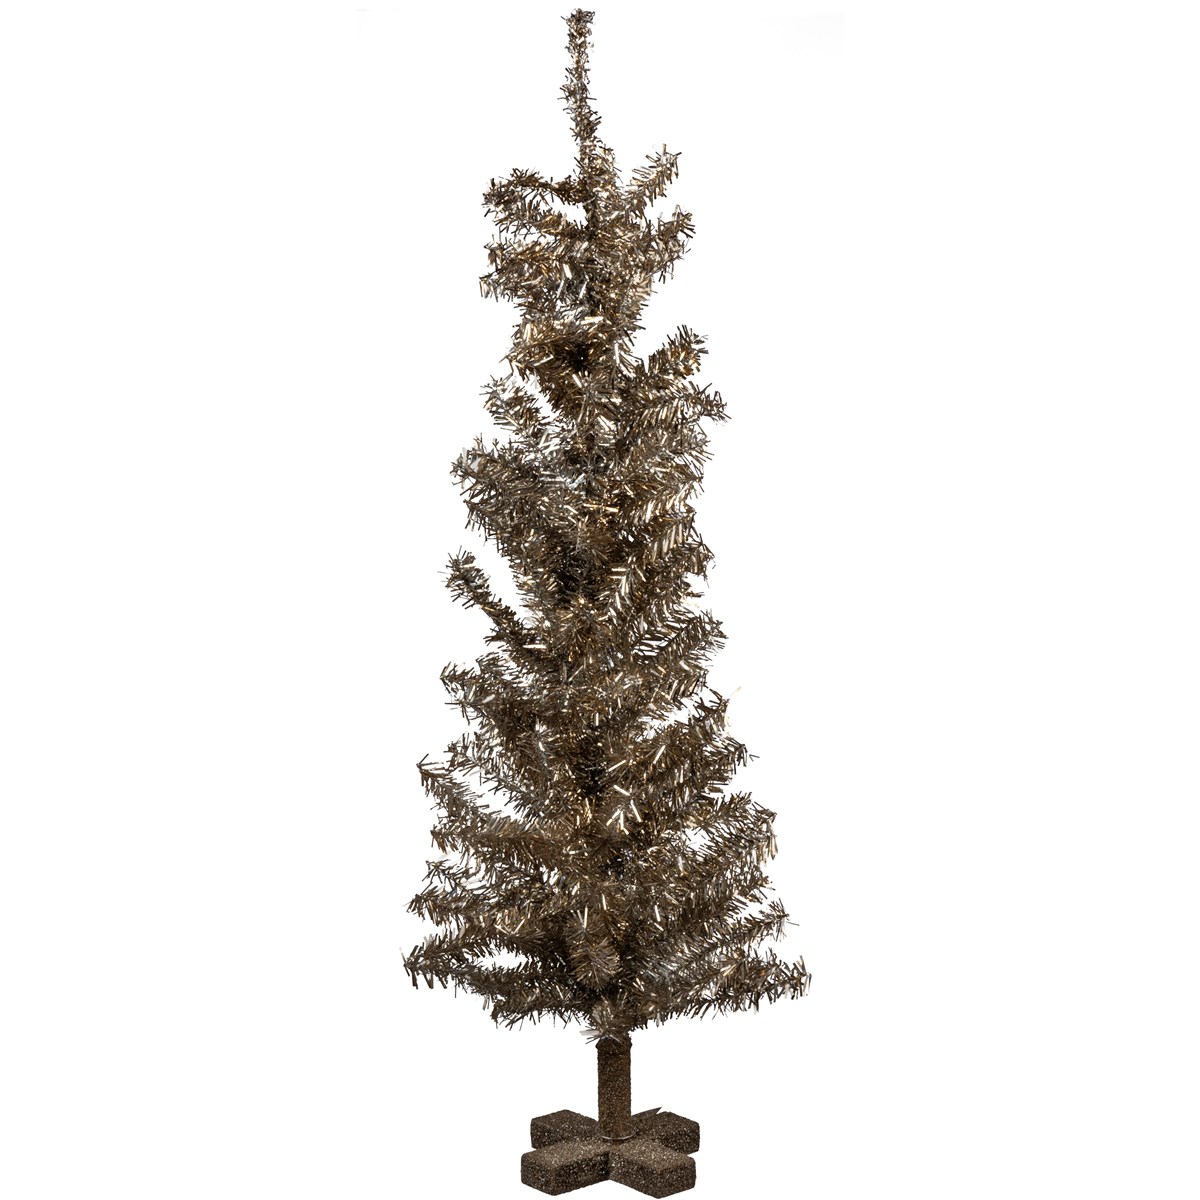 Large Silver Tinsel Christmas Tree - Wire, Tinsel, Wood, Glitter